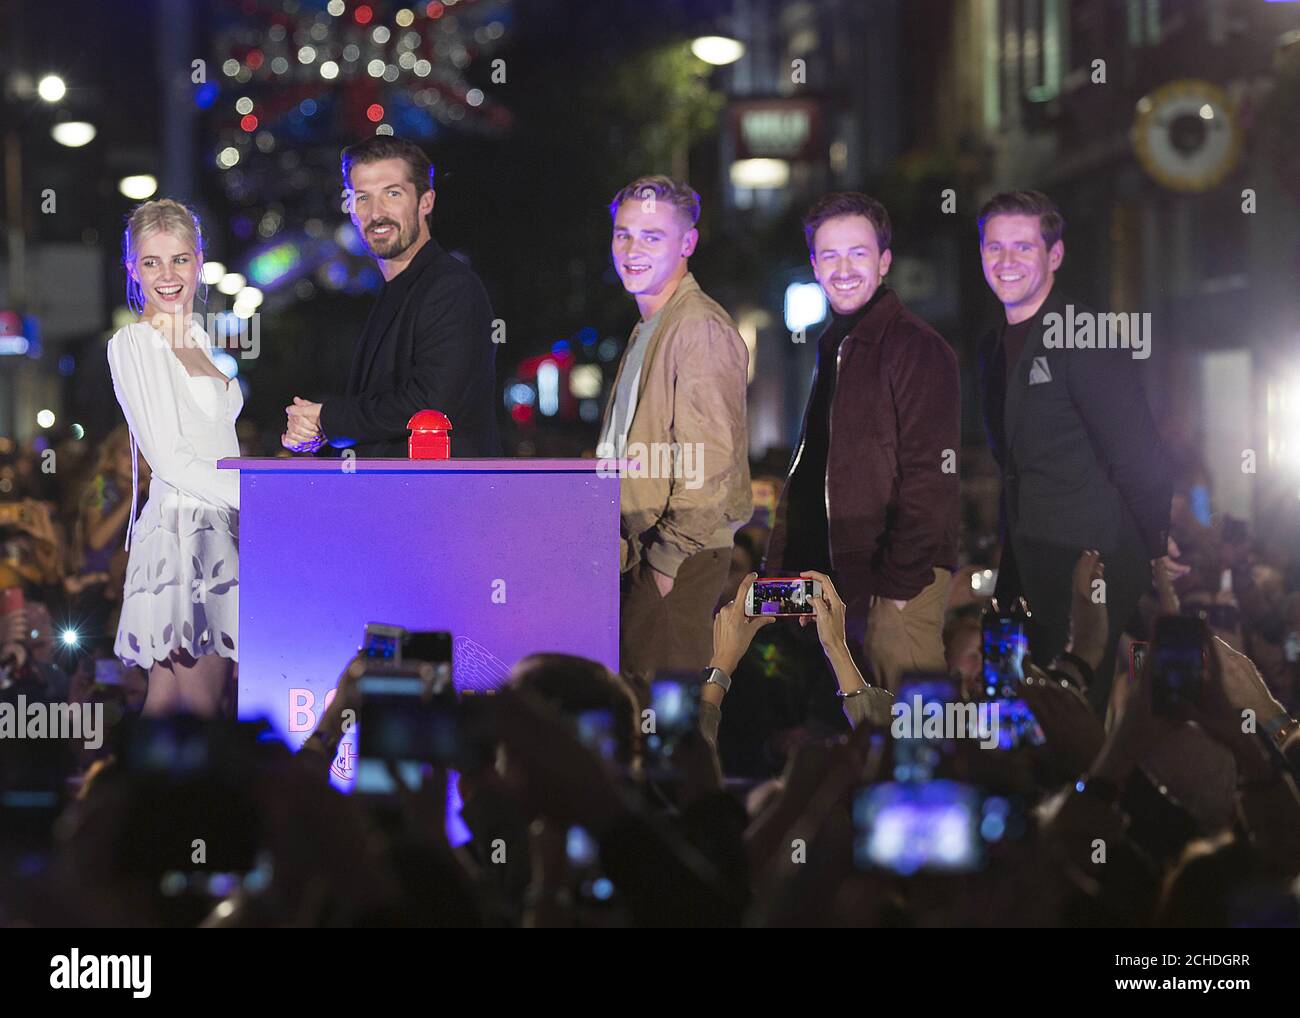 Cast members of the Bohemian Rhapsody film (left to right) Lucy Boynton, Gwilym Lee, Ben Hardy, Joe Mazzello and Allen Leech at the official launch of a light installation celebrating the Queen song at Carnaby Street in London. The lights featuring Freddie Mercury's lyrics will illuminate the street until January, in honour of the upcoming movie. Stock Photo